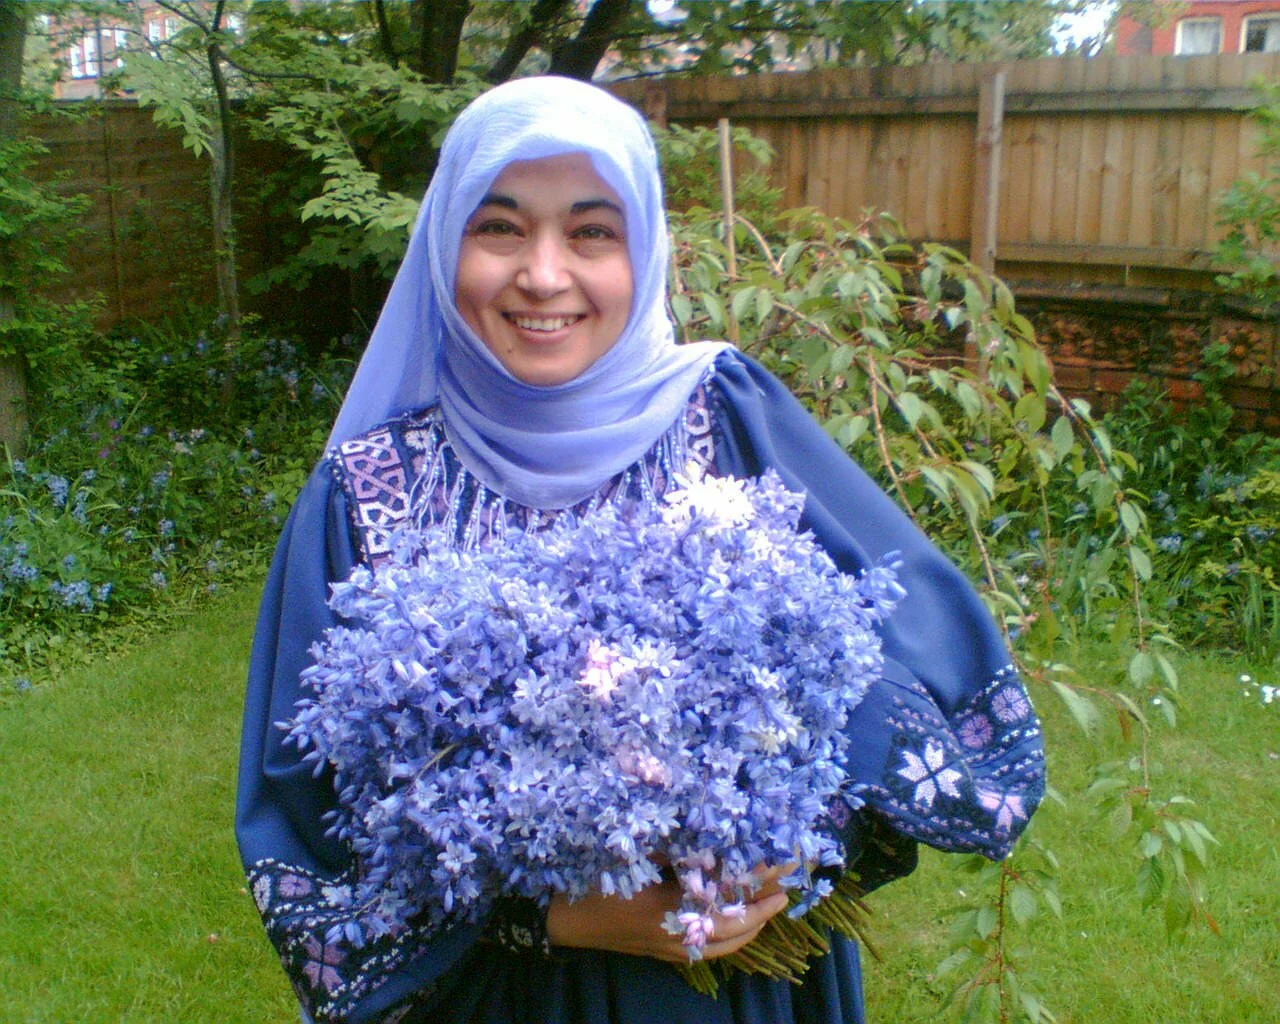 Palestinian women with spary of blue flowers